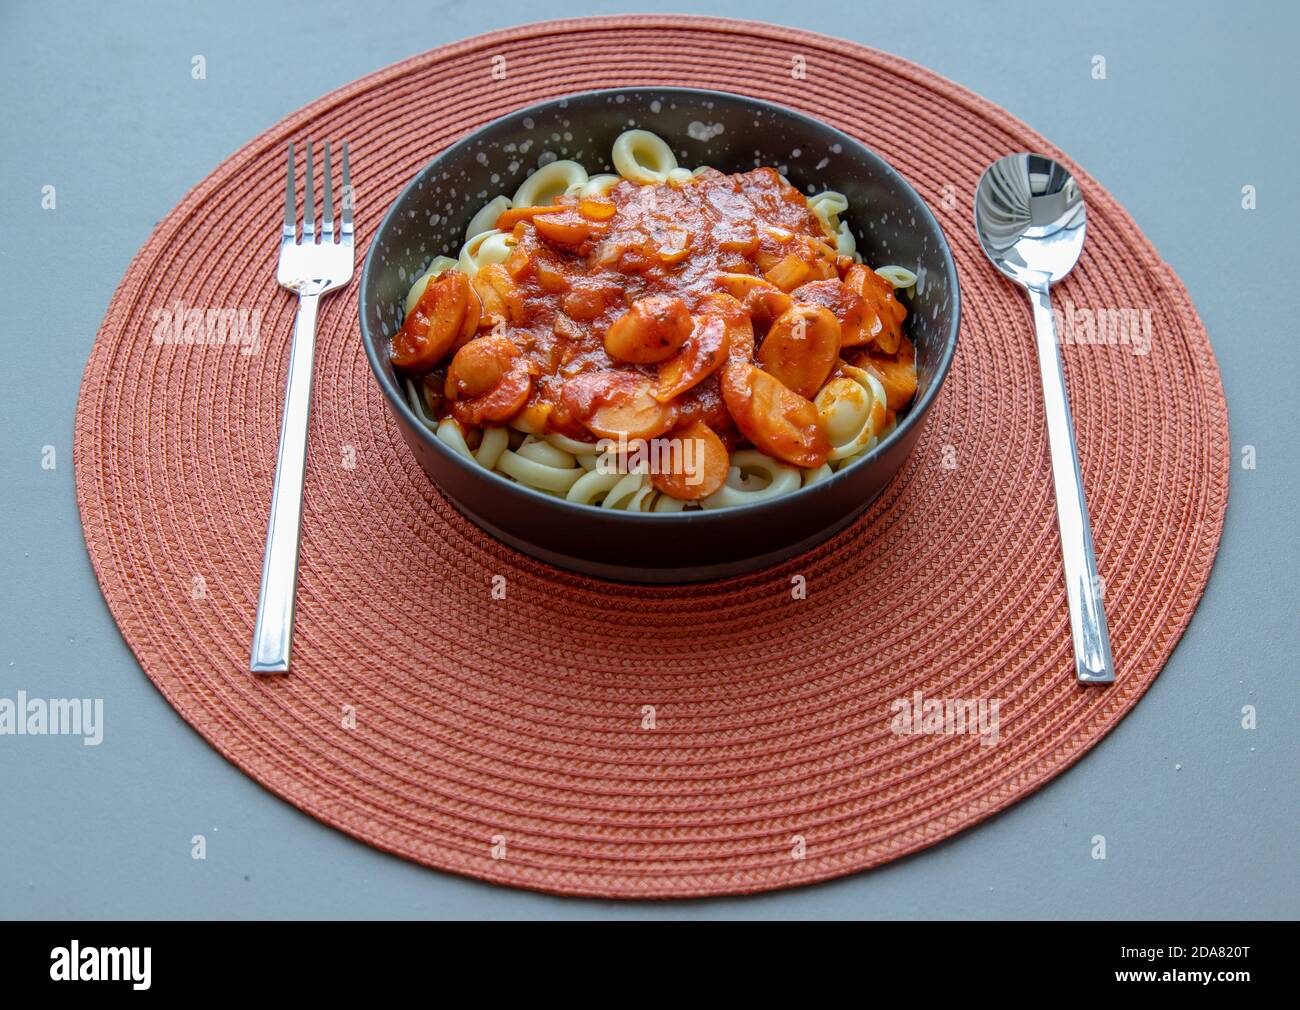 Dischi pasta with sausage, onion and balognese sauce in a black plate on red background. Copy space, No focus, specifically. Stock Photo